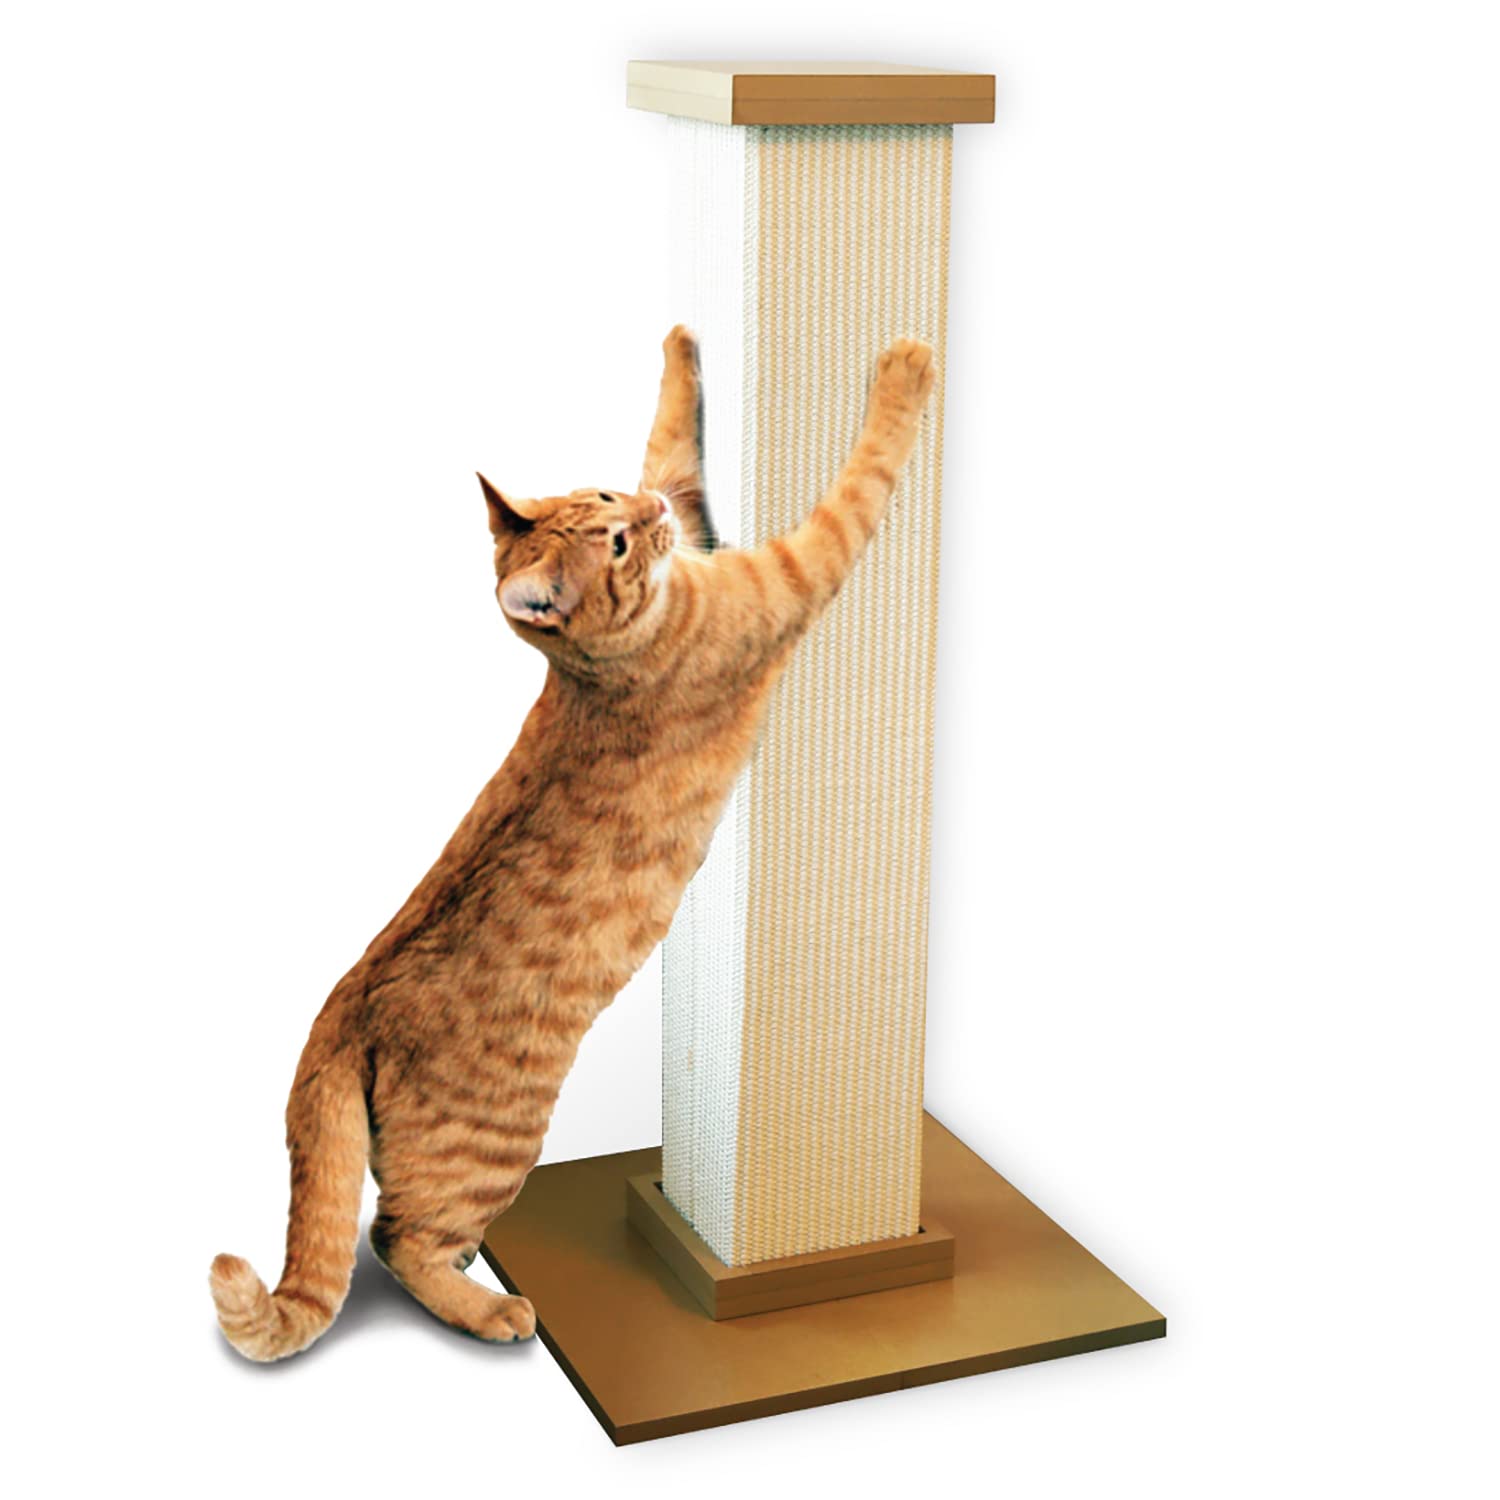 Can Cats Share Scratching Posts